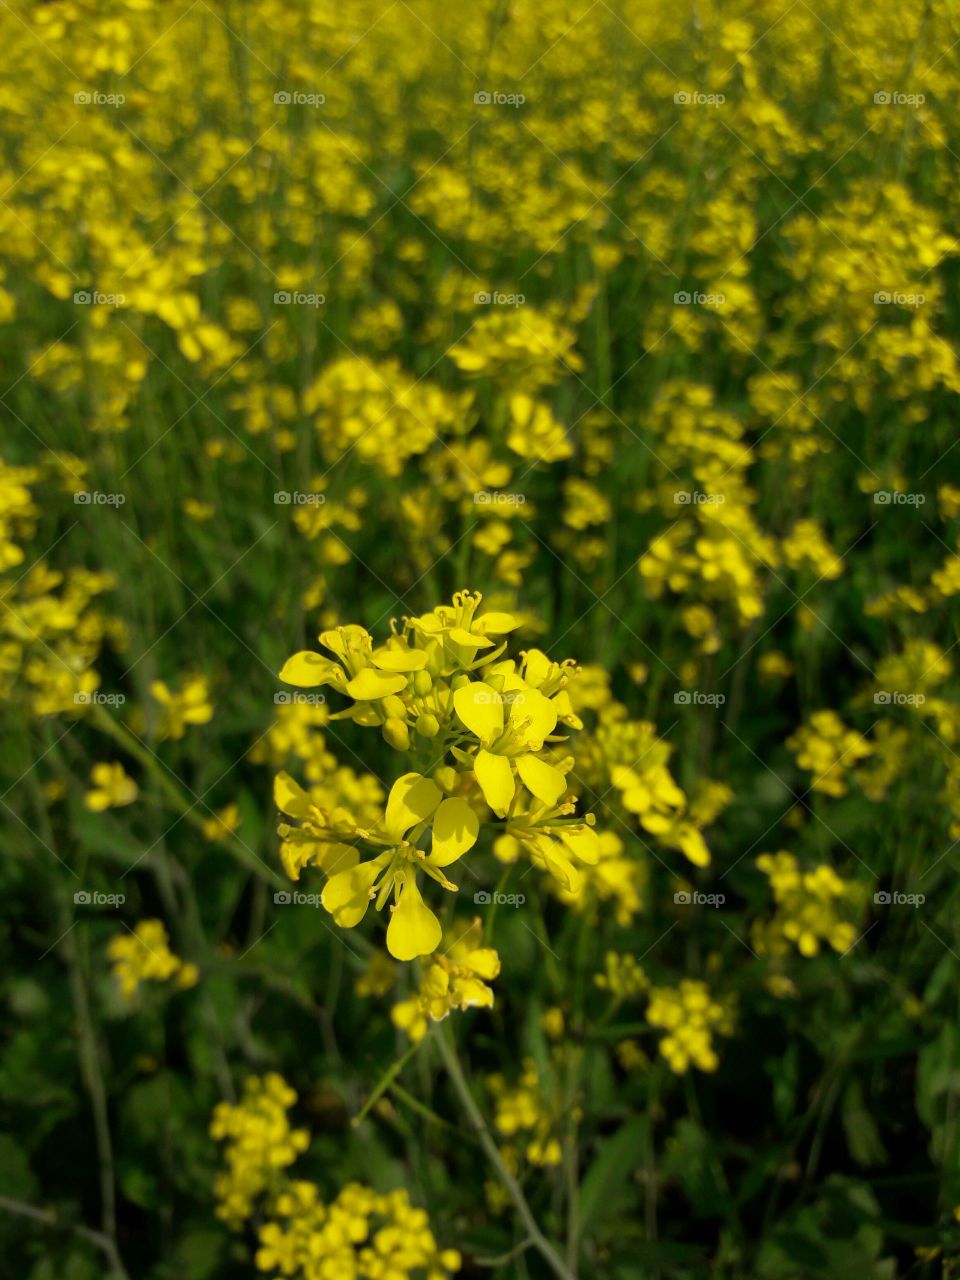 My eyes are only seeing the yellow mustard flowers.... Their marvelous look ..... really fantastic..